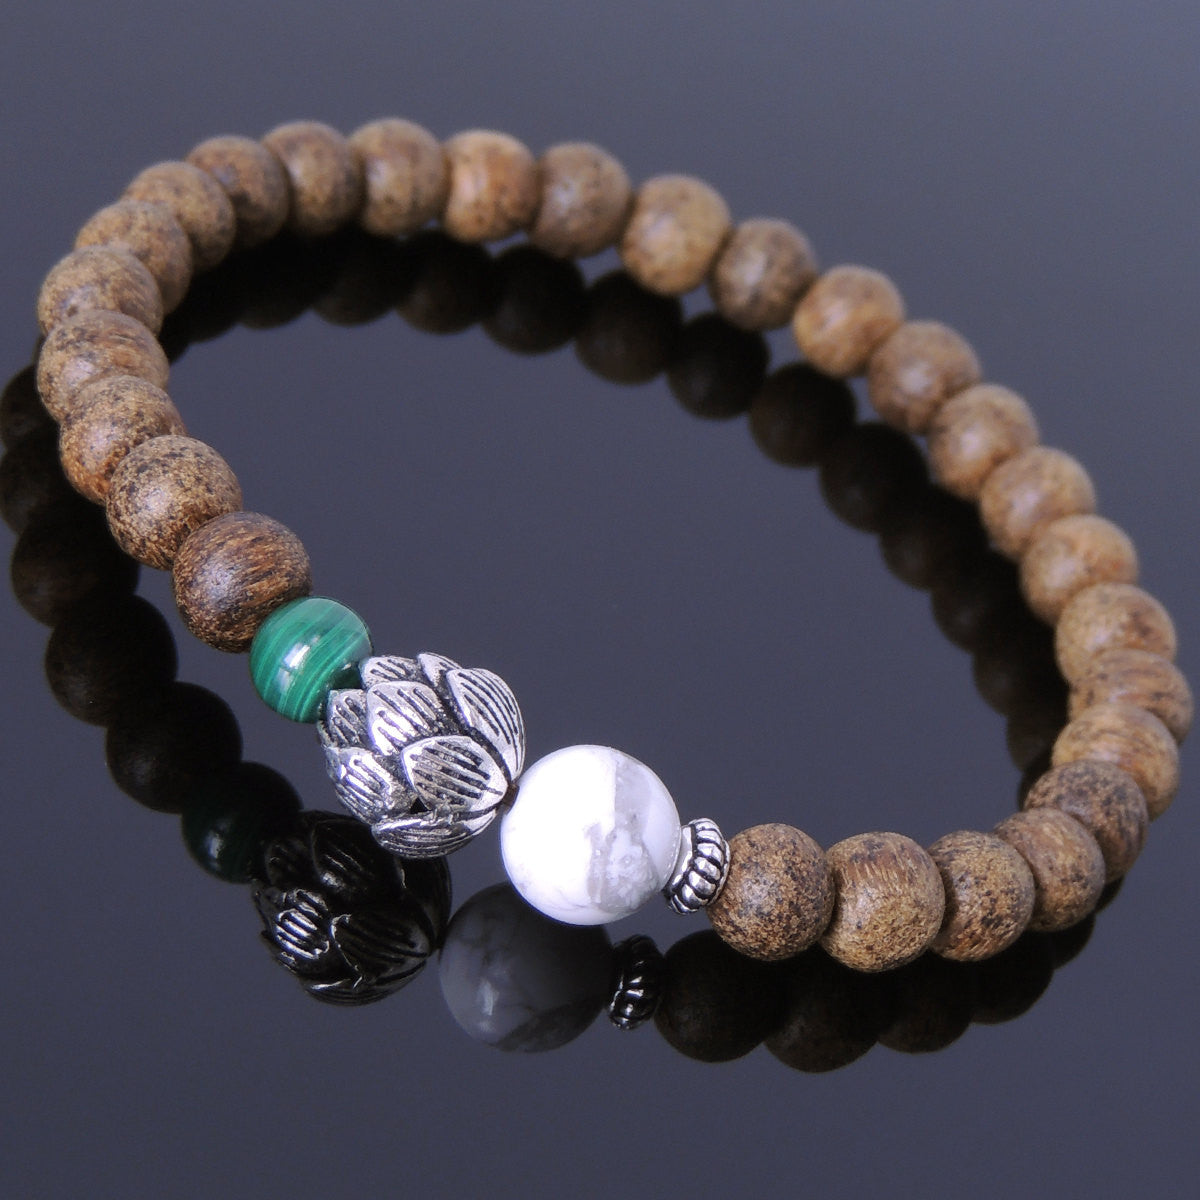 Malachite, White Howlite, & Agarwood Bracelet for Prayer & Meditation with S925 Sterling Silver Spacer & Lotus Protection Bead - Handmade by Gem & Silver BR698